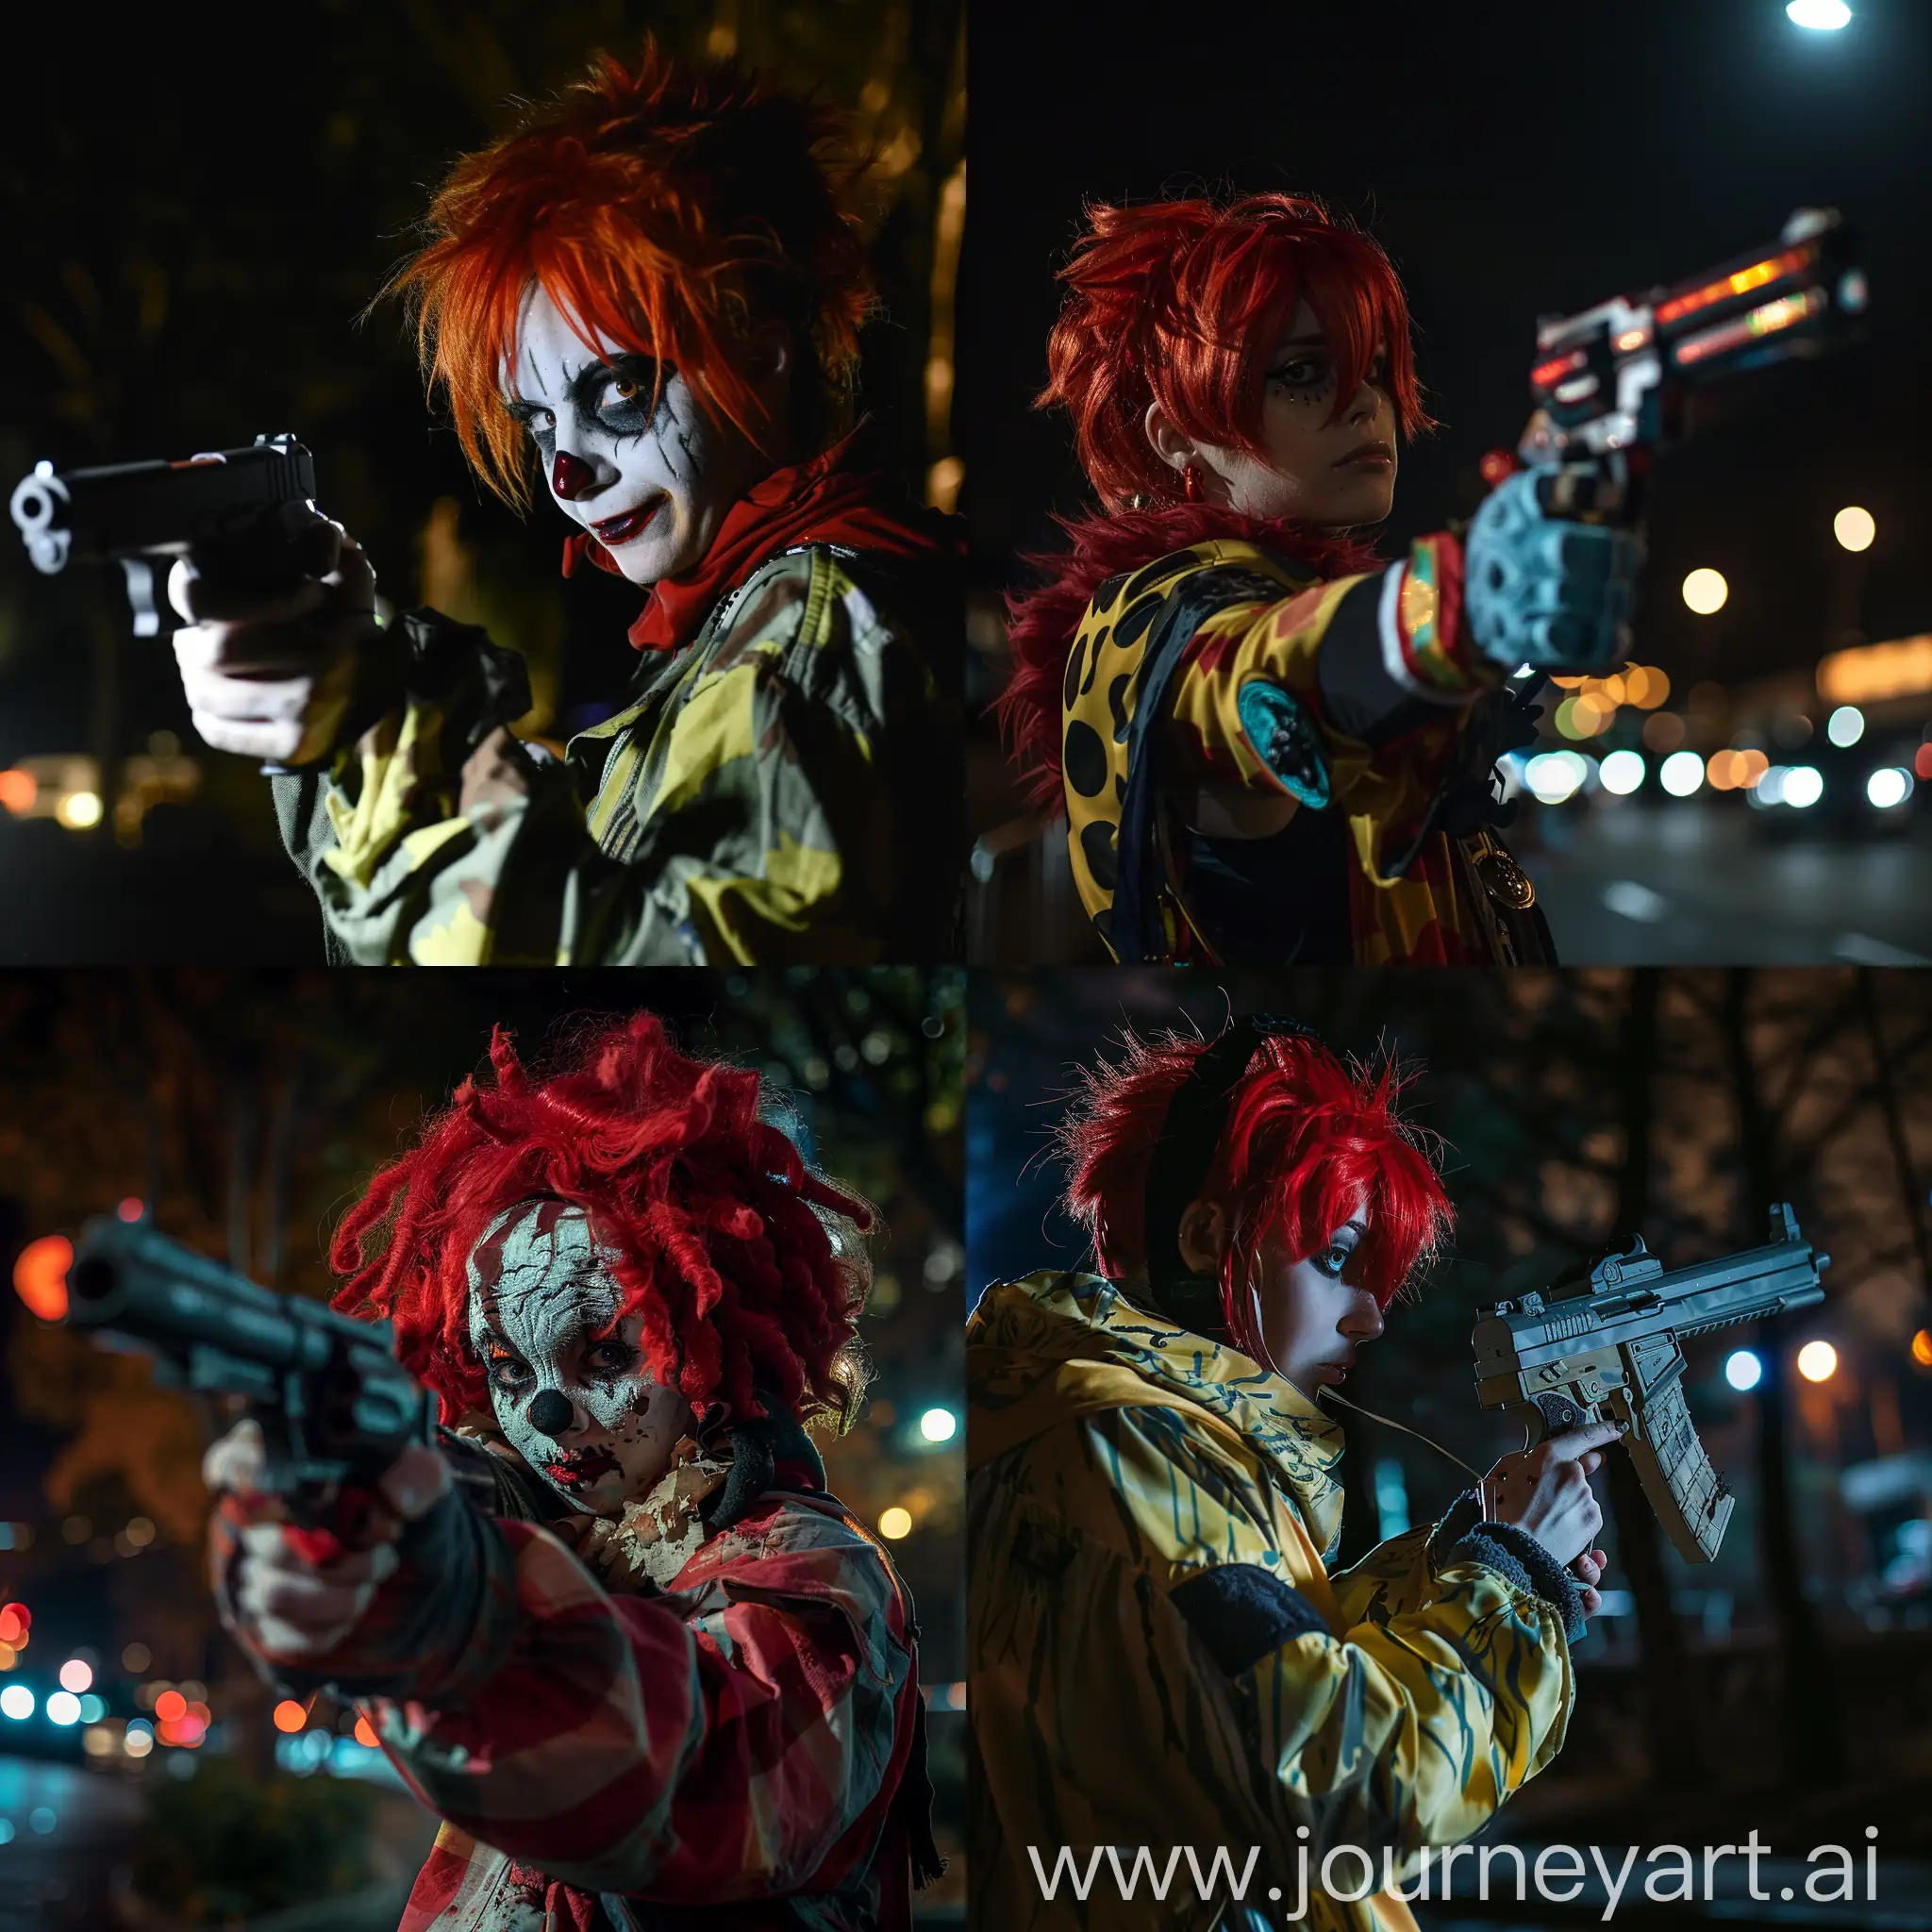 Vibrant-RedHaired-Gun-Costume-Under-the-Night-Sky